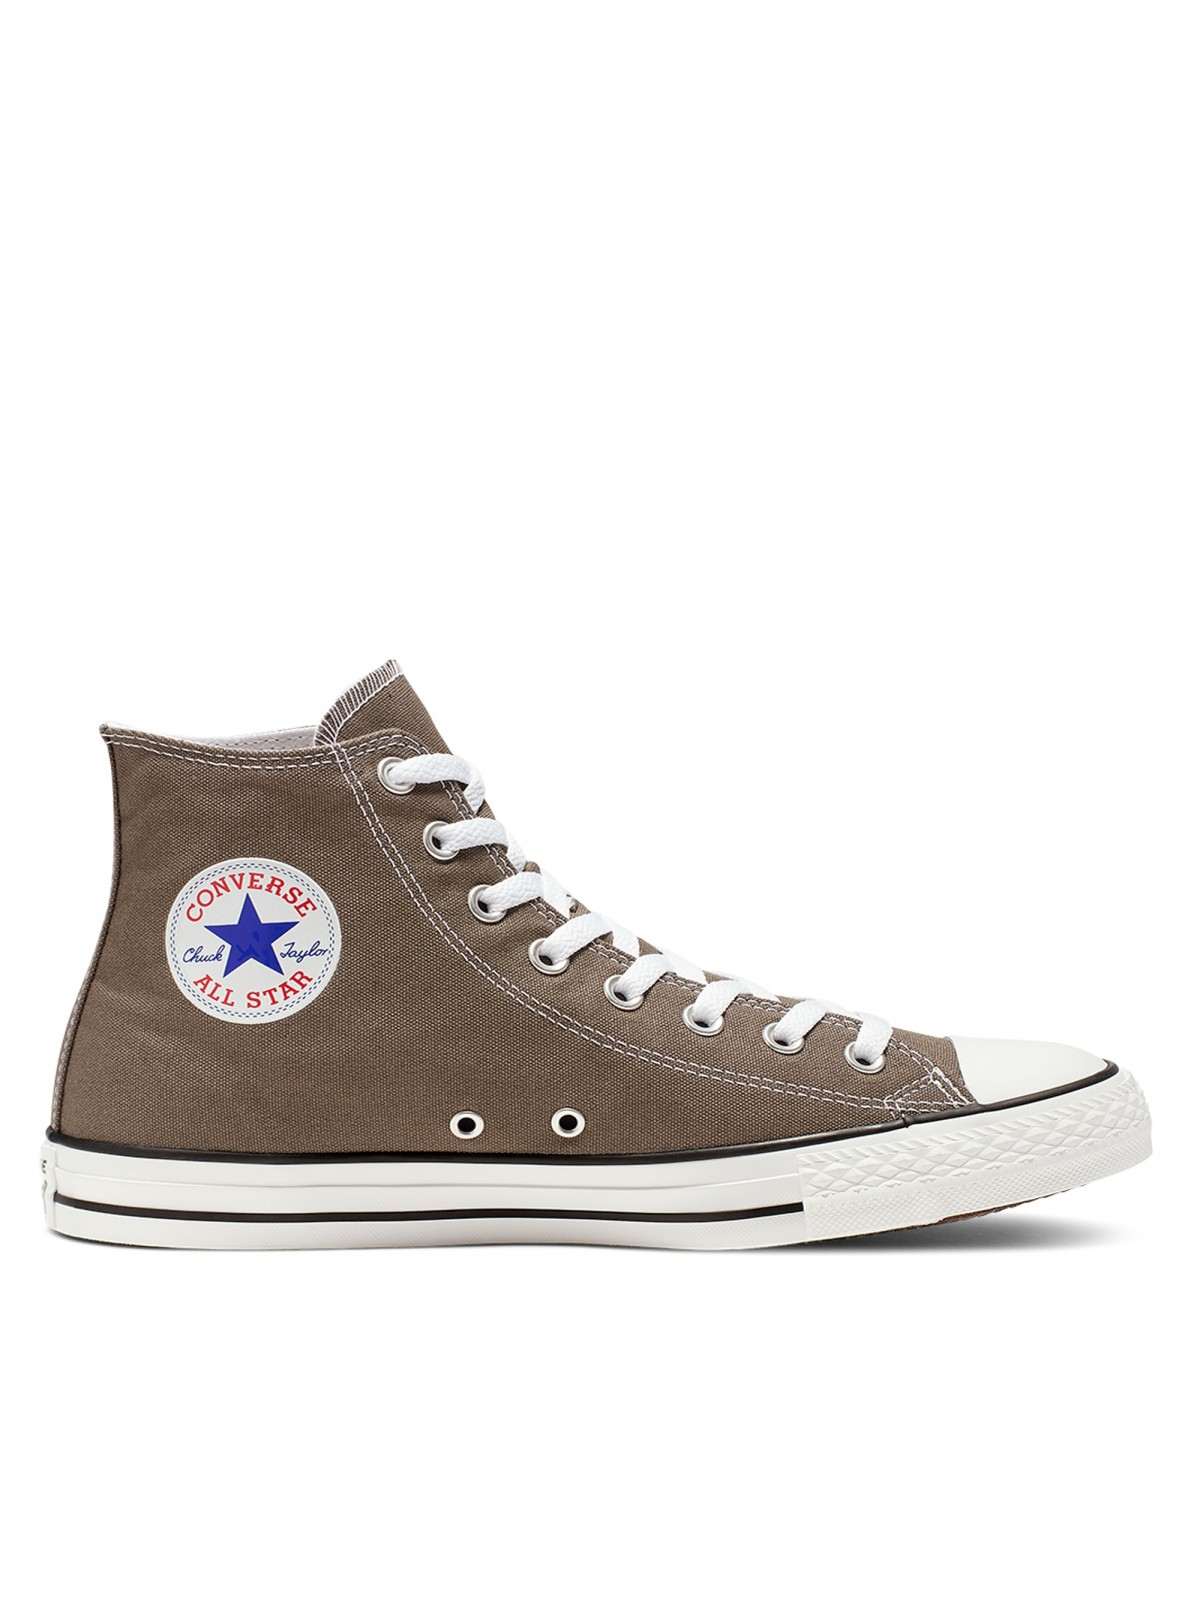 Converse Chuck Taylor all star toile anthracite